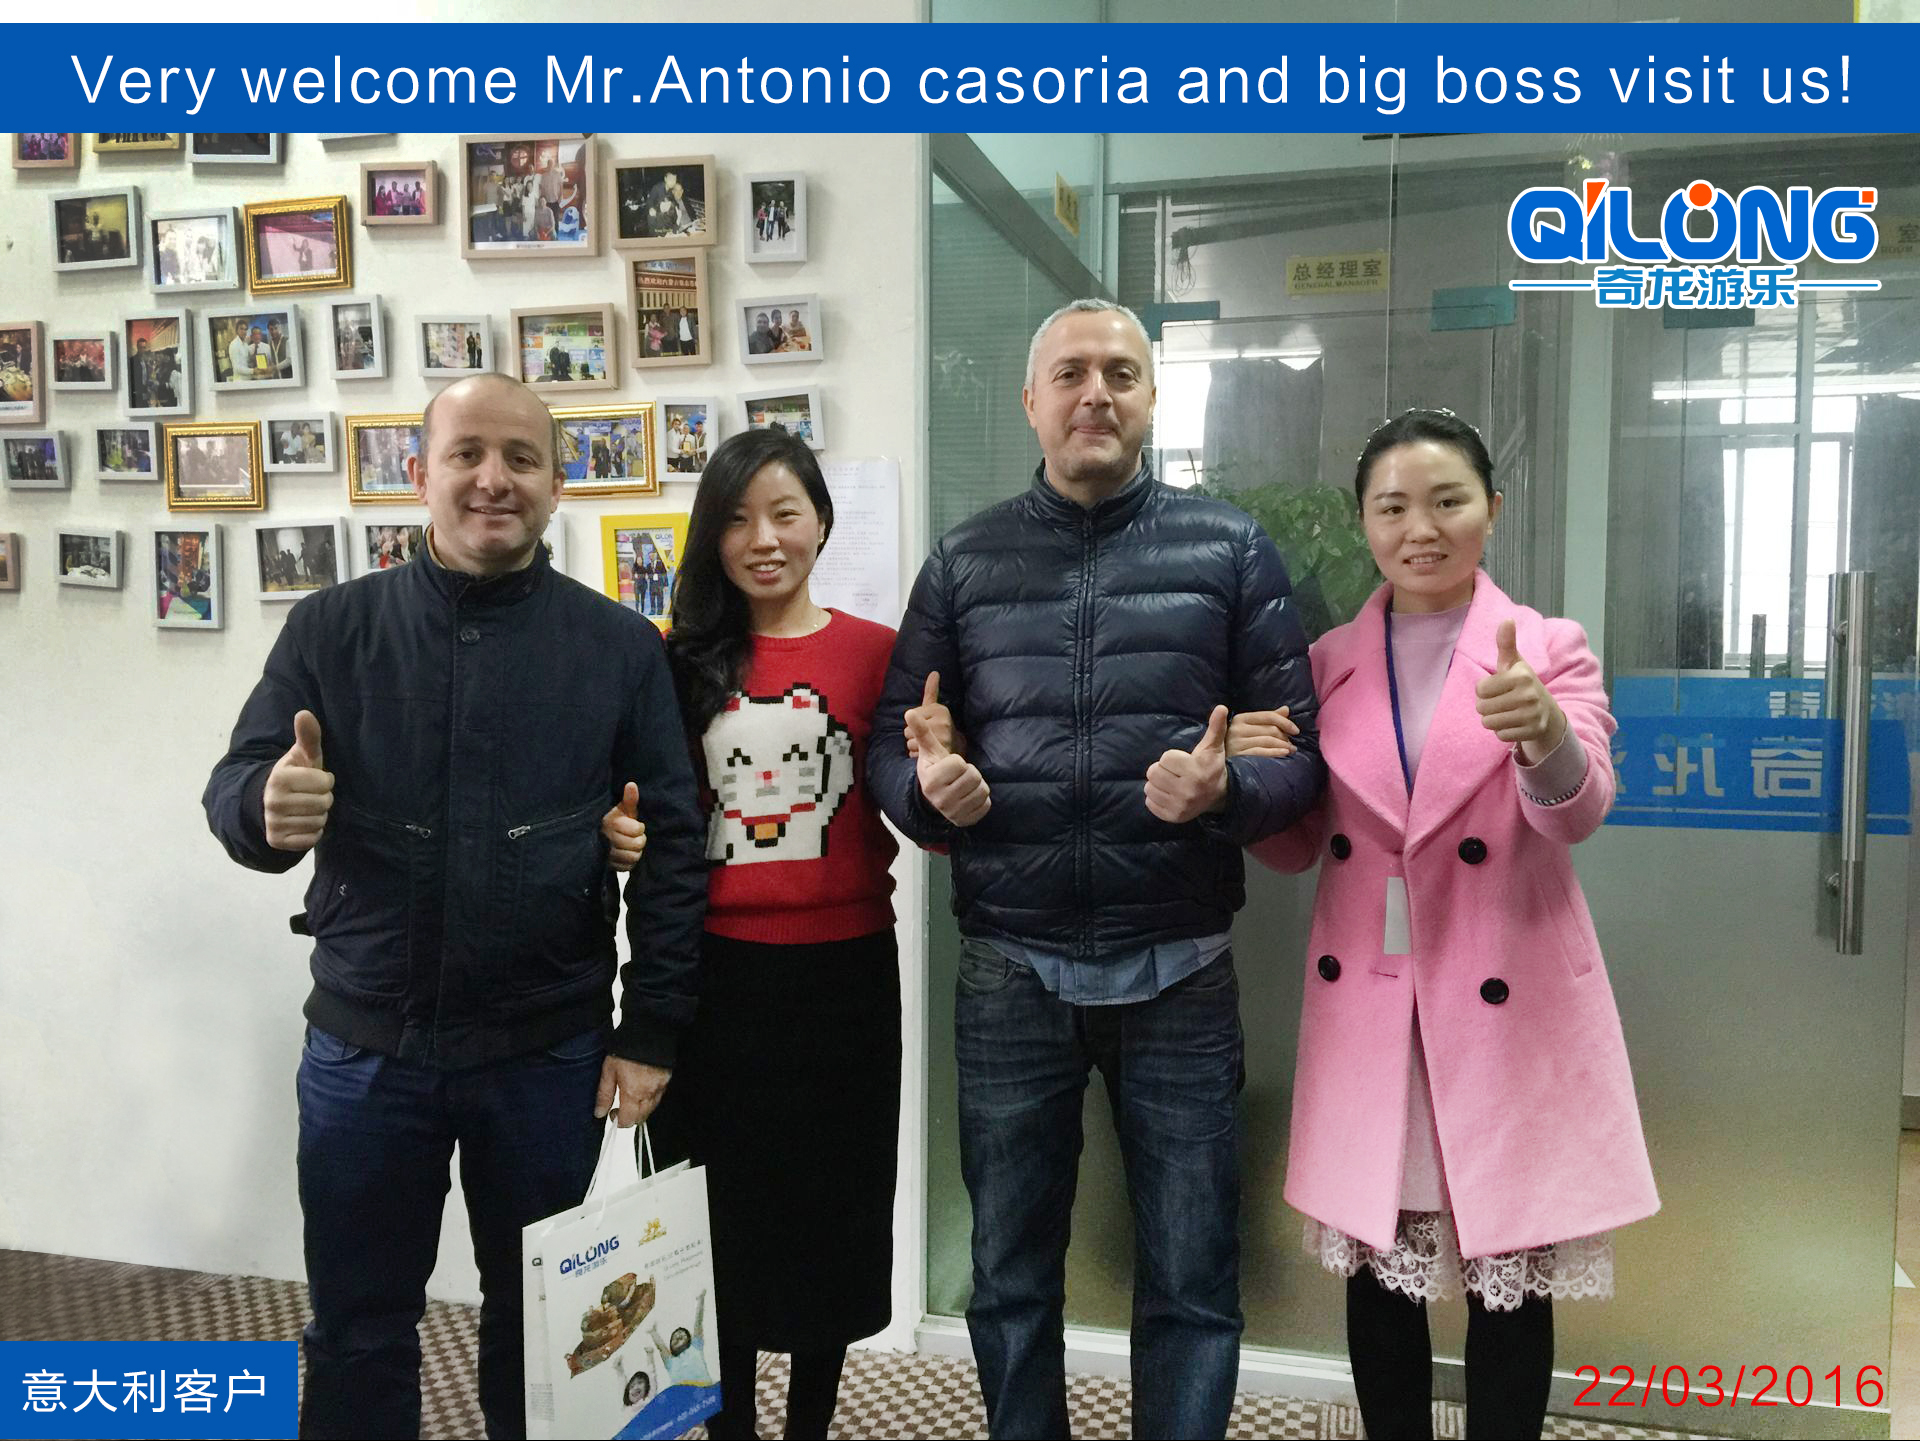 Italy customers visit us which met us on Guangzhou Fair.